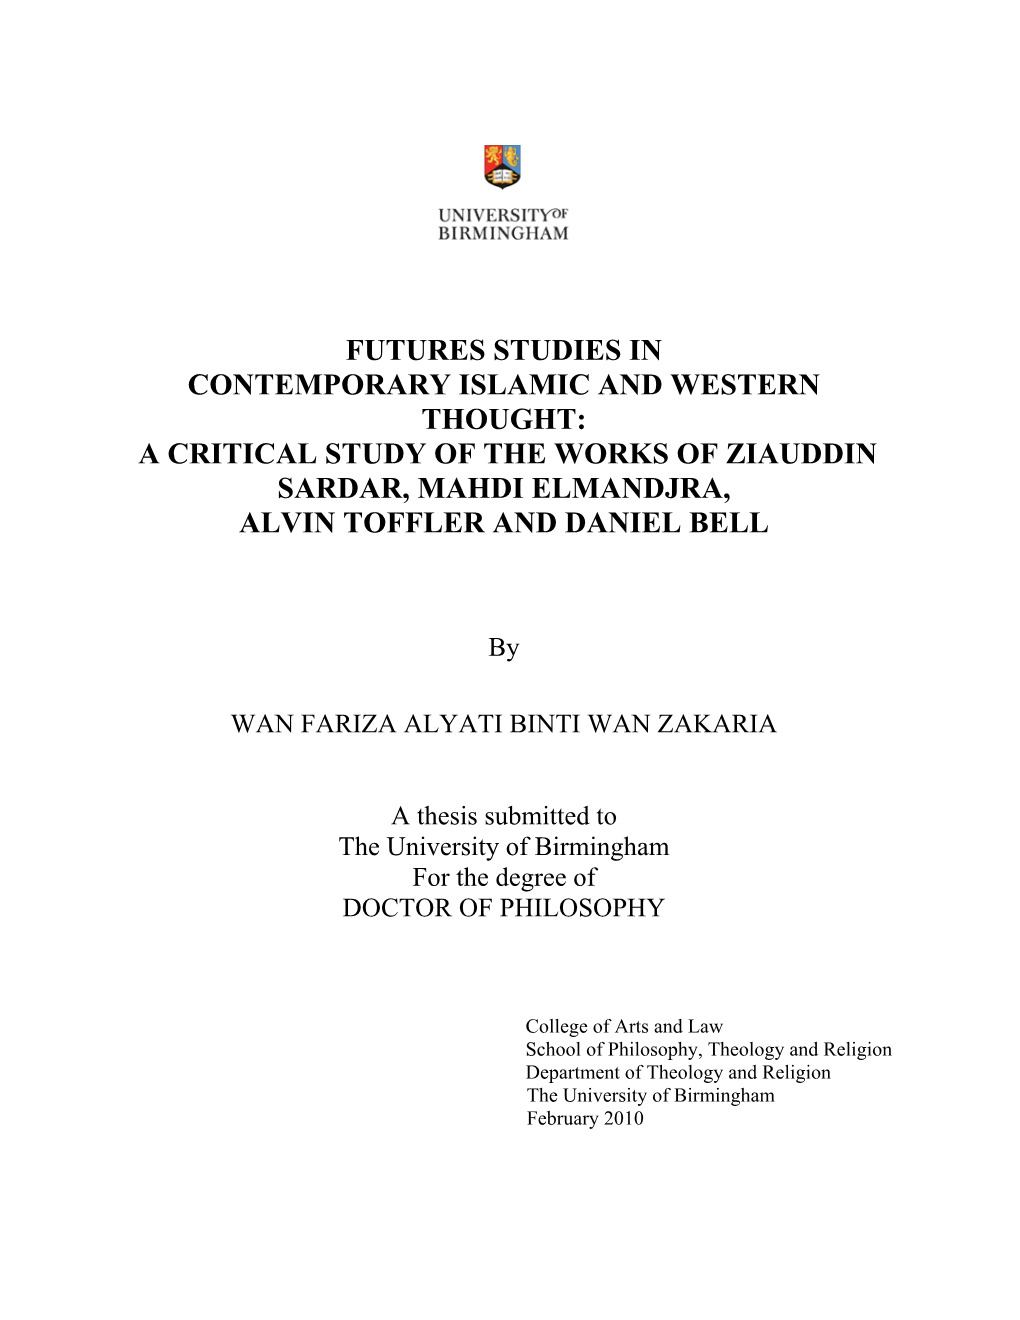 Futures Studies in Contemporary Islamic and Western Thought: a Critical Study of the Works of Ziauddin Sardar, Mahdi Elmandjra, Alvin Toffler and Daniel Bell